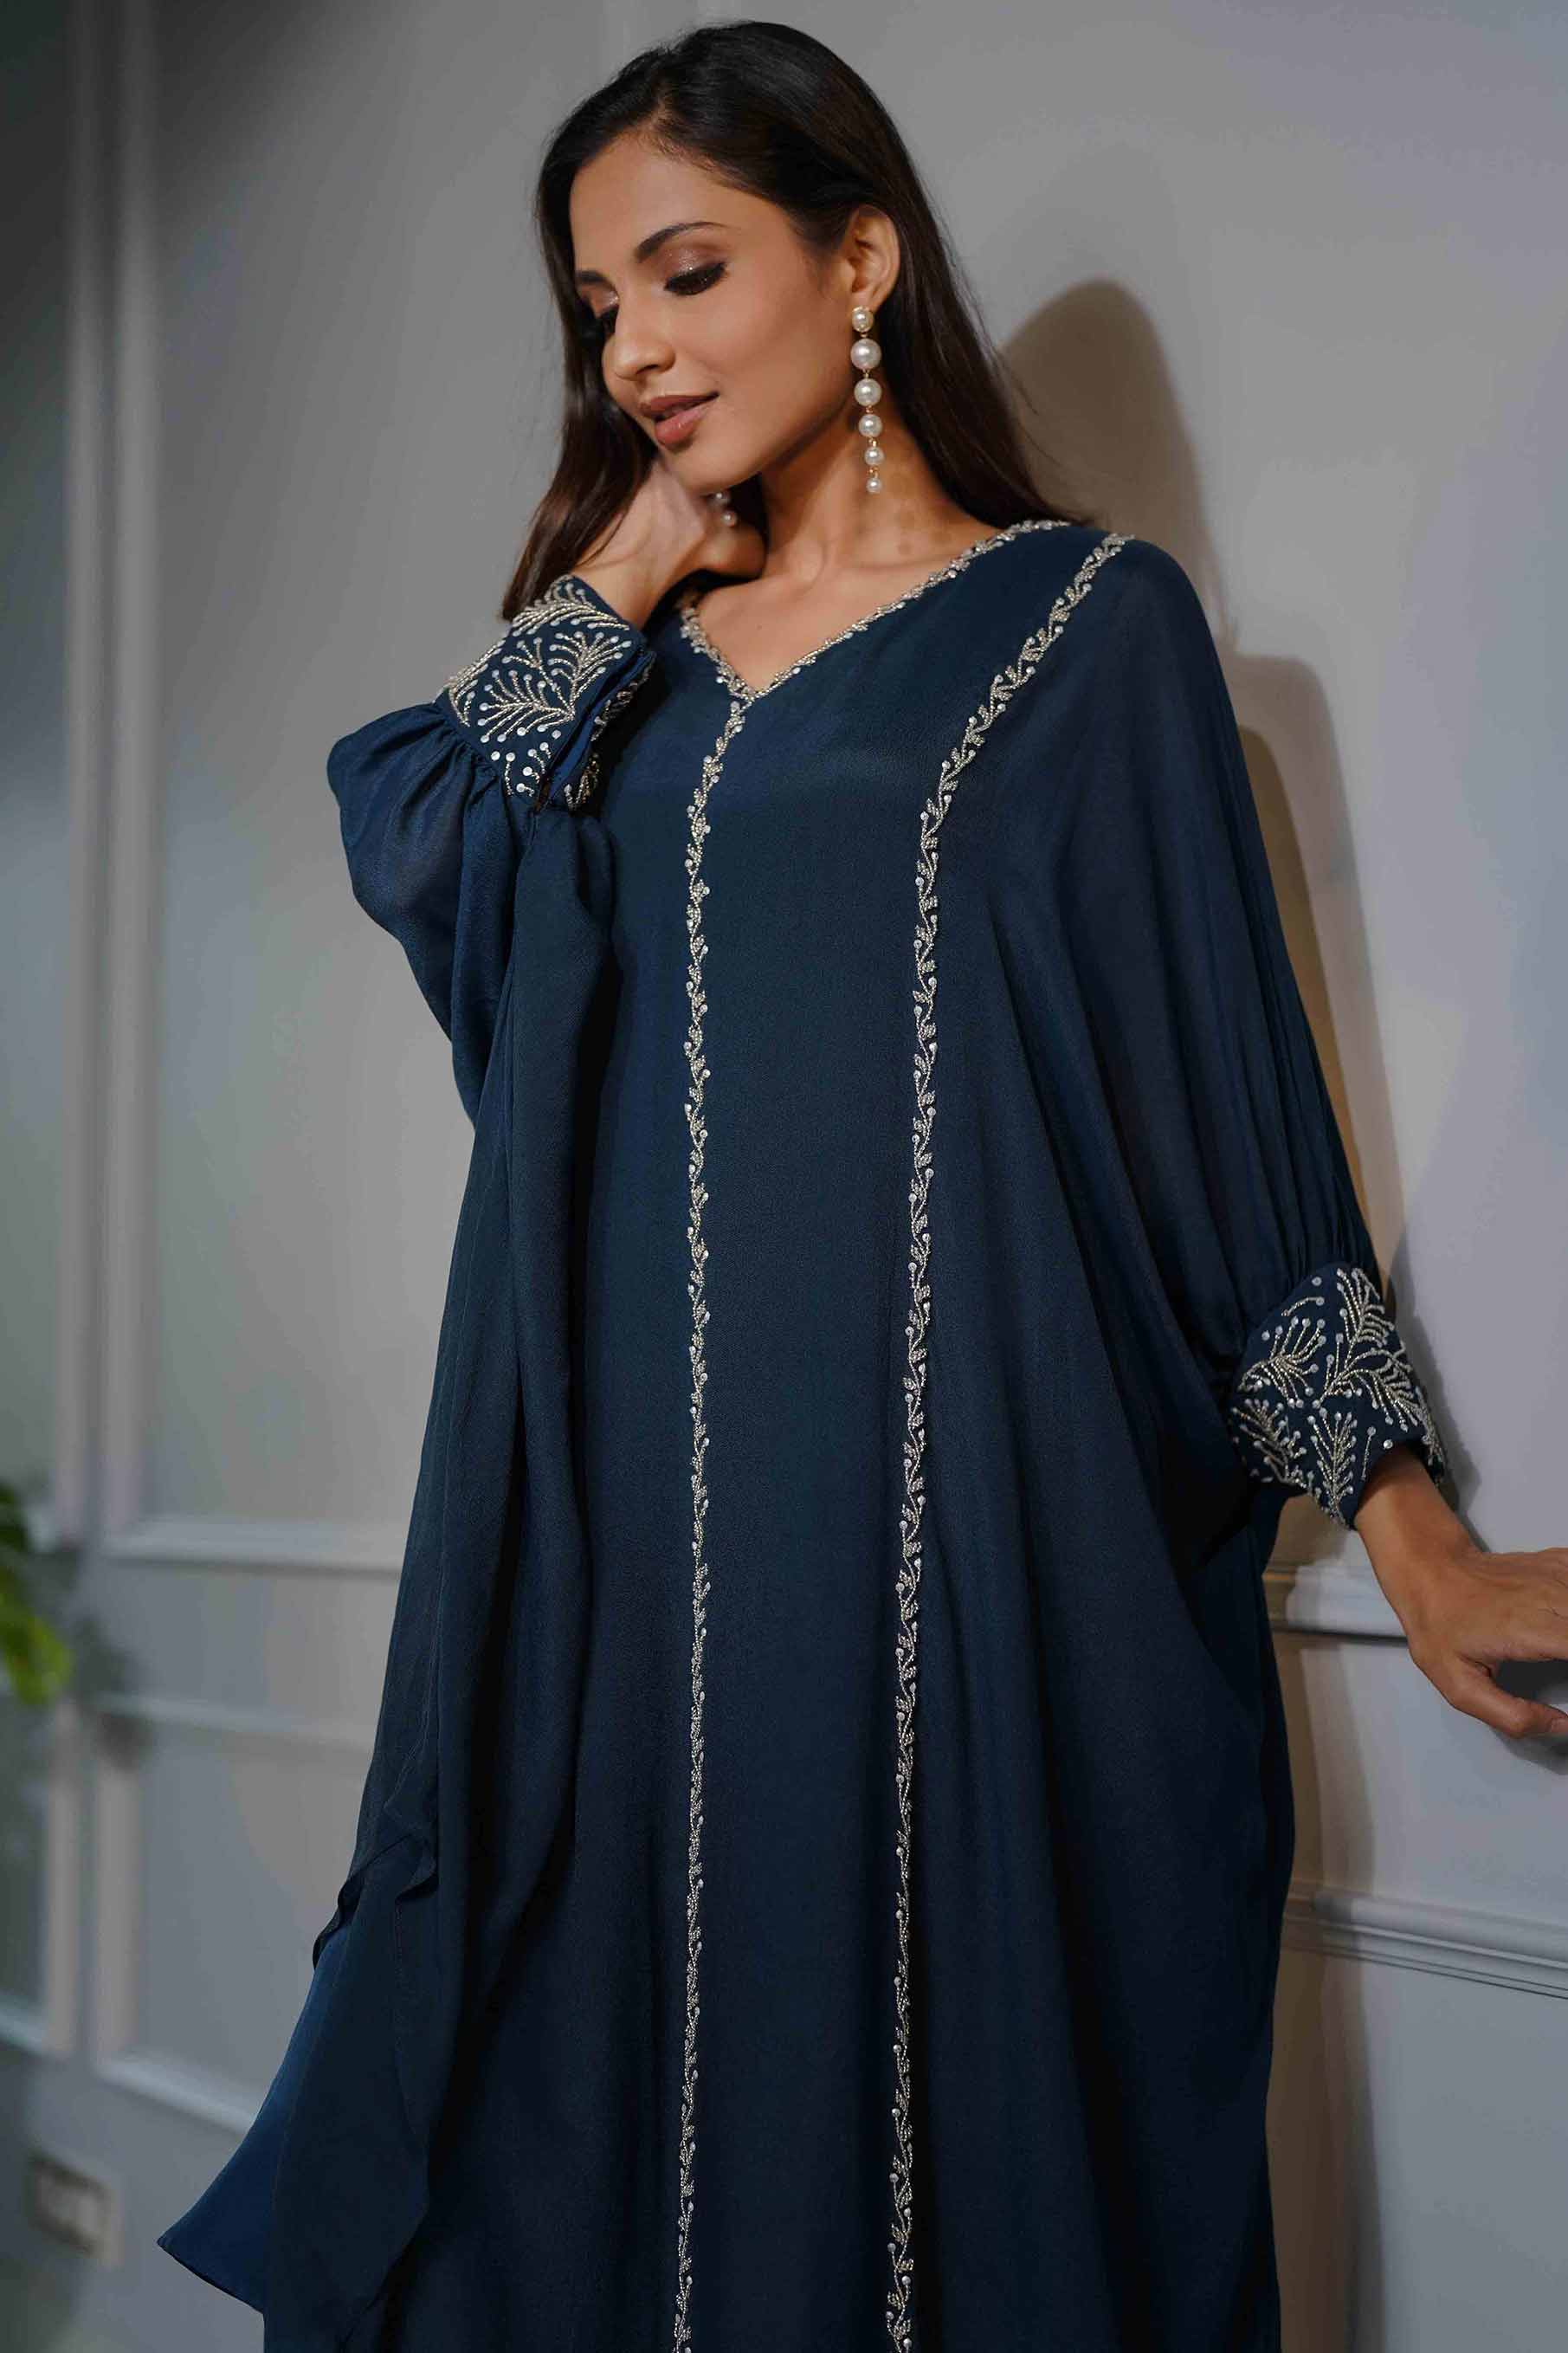 Teal blue flared poncho style tunic with dhoti pants.